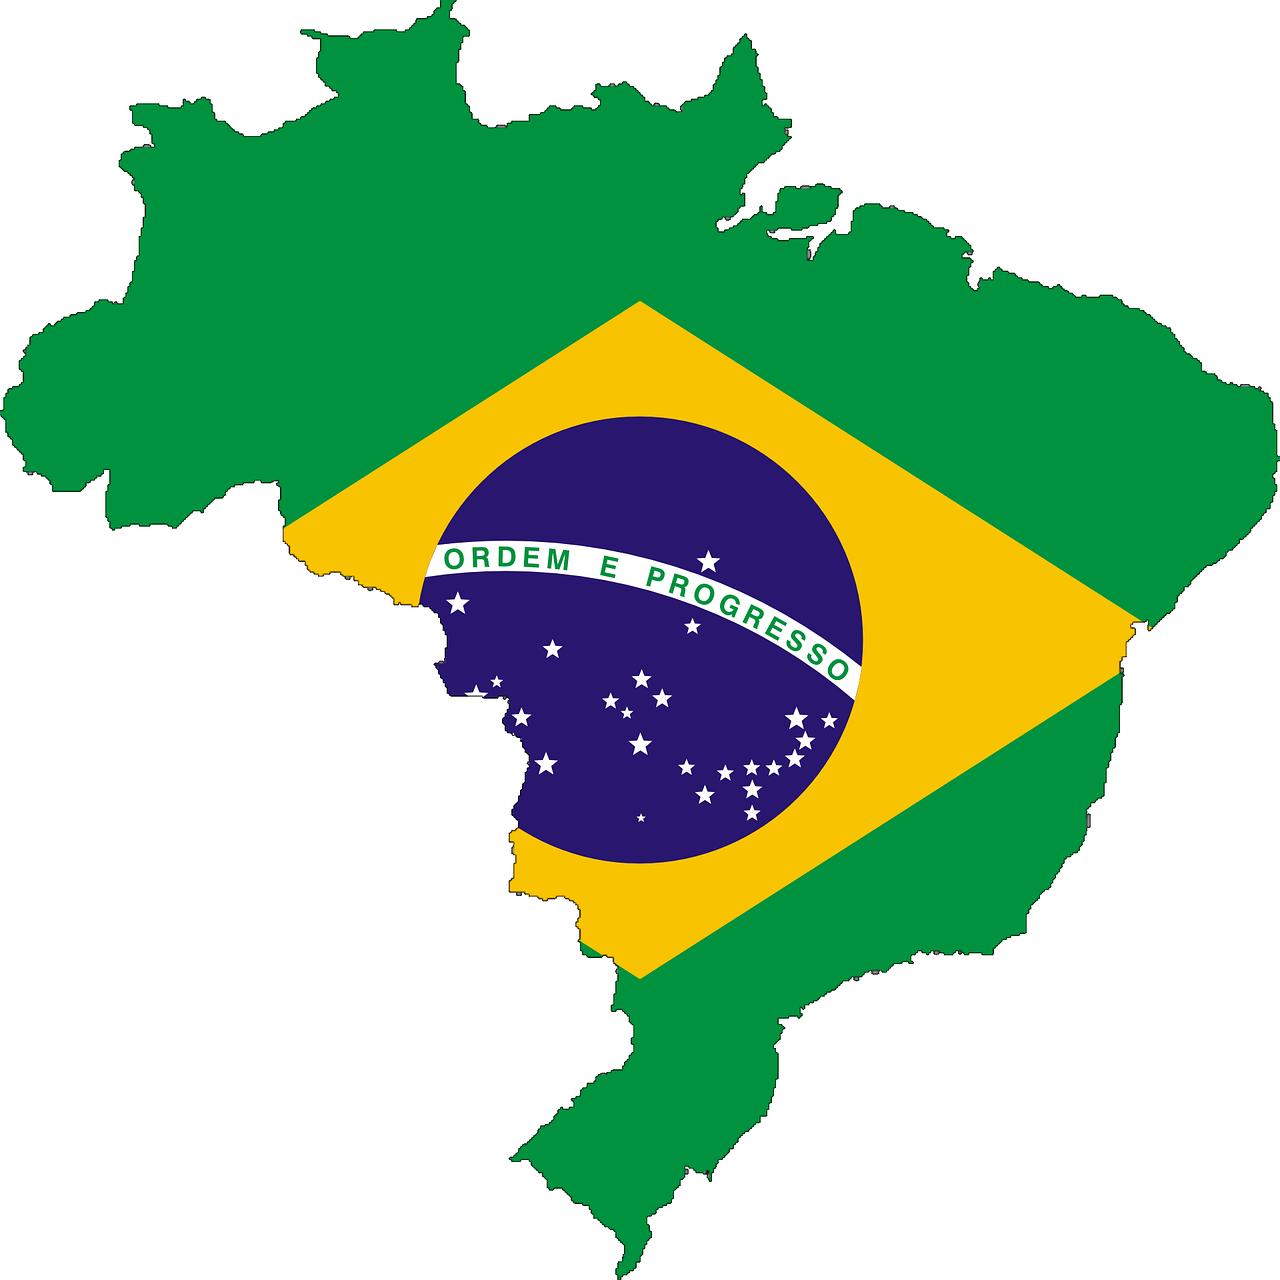 Brazil: the implementation of analytical rules for wine imports